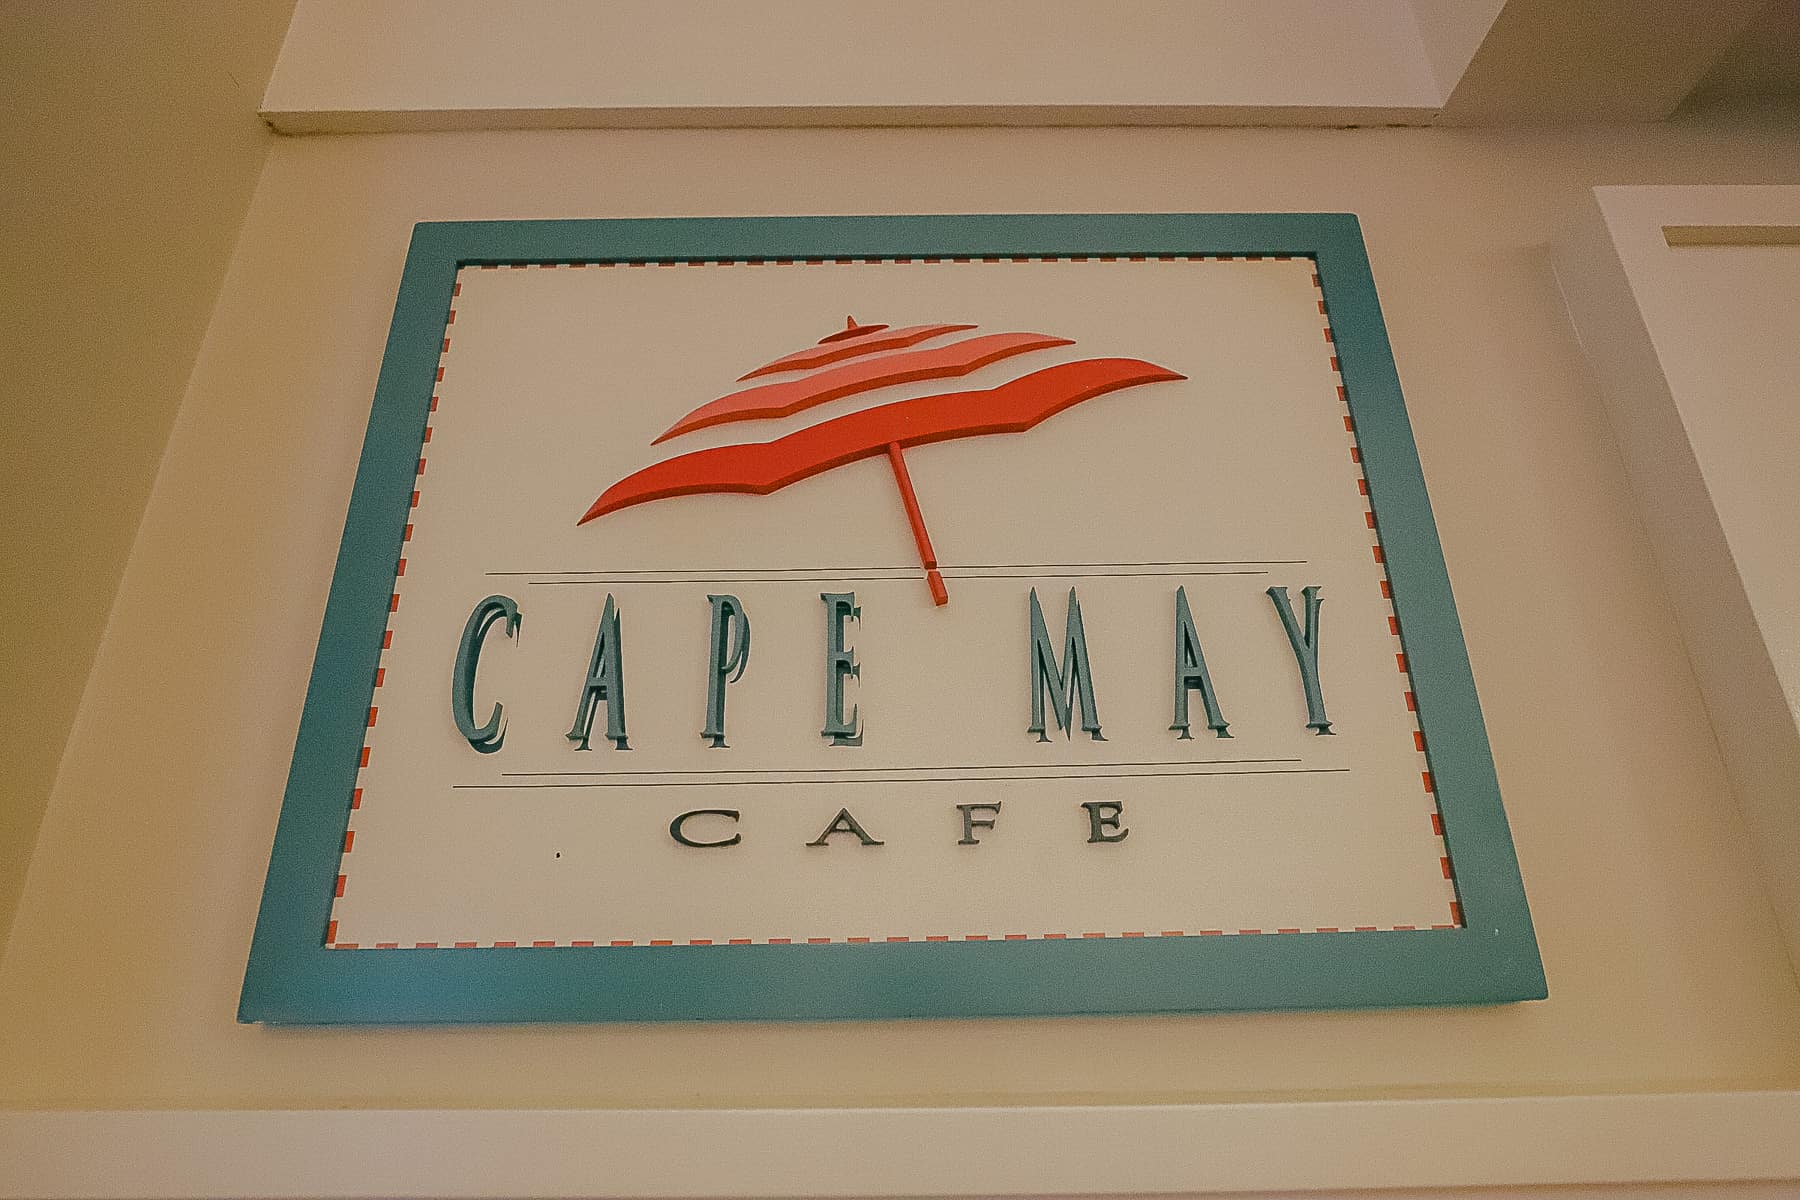 Cape May Cafe sign 